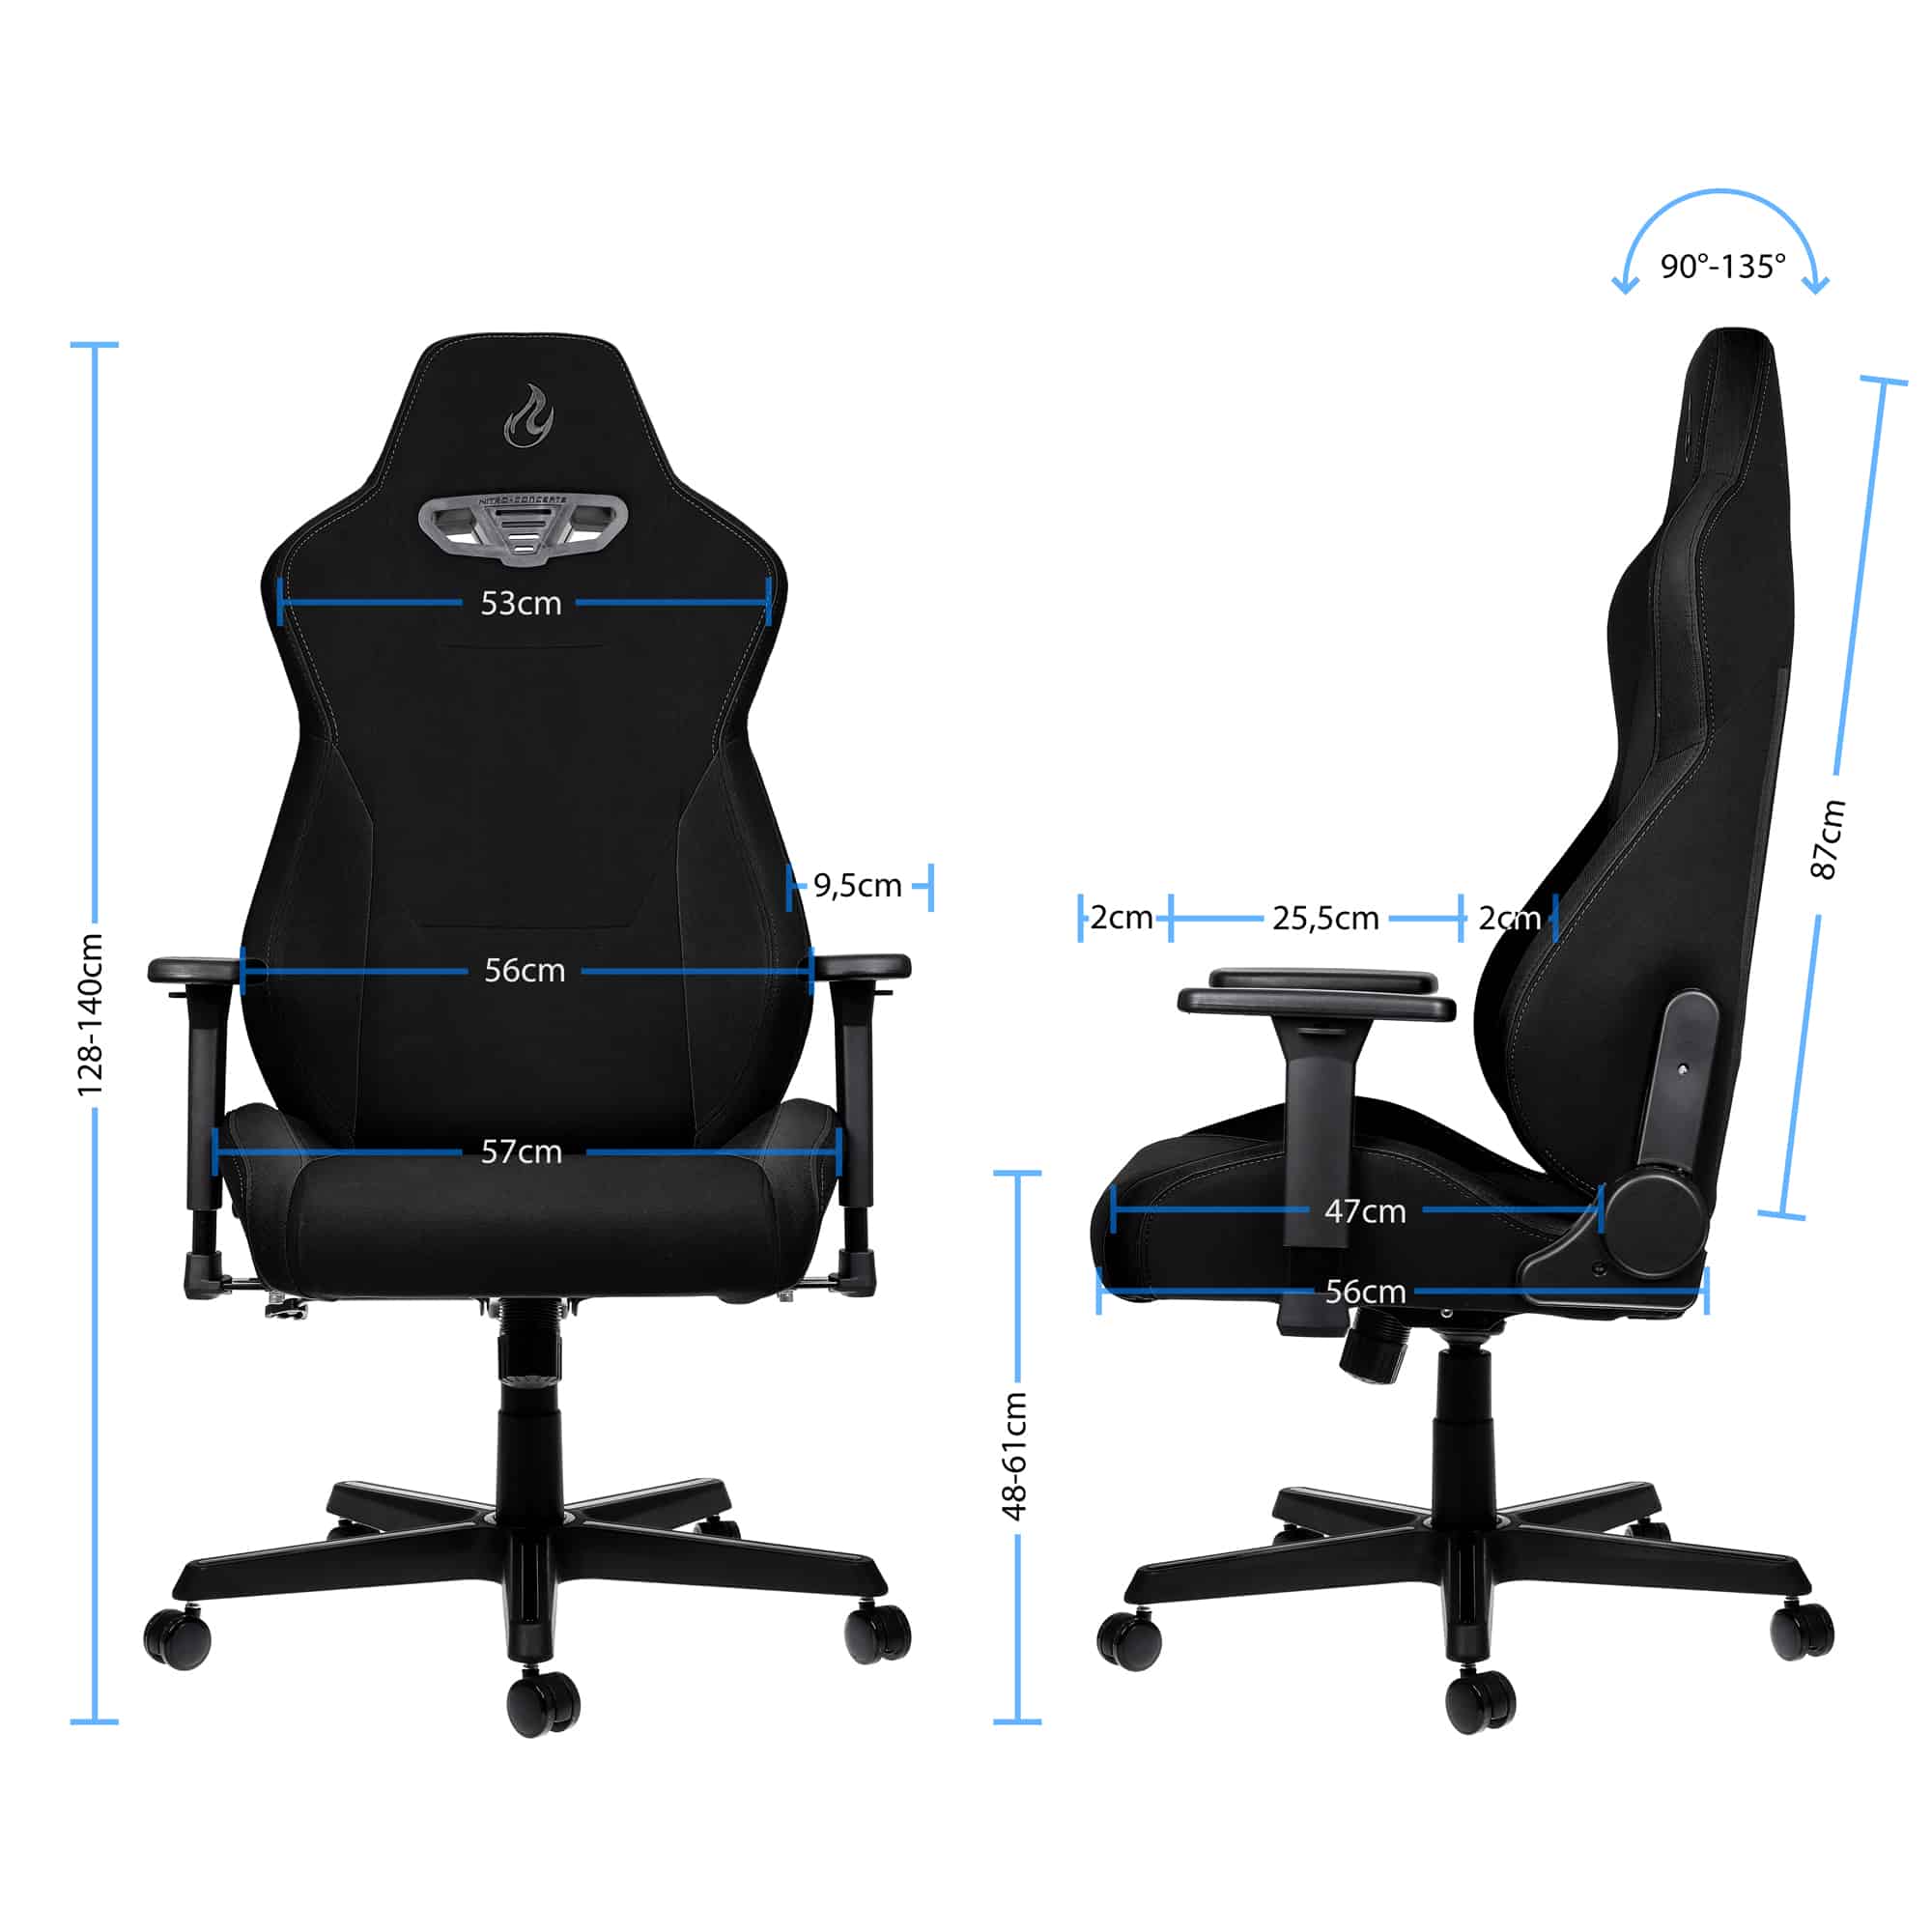 Nitro Concepts S300 Series Gaming Chair Black